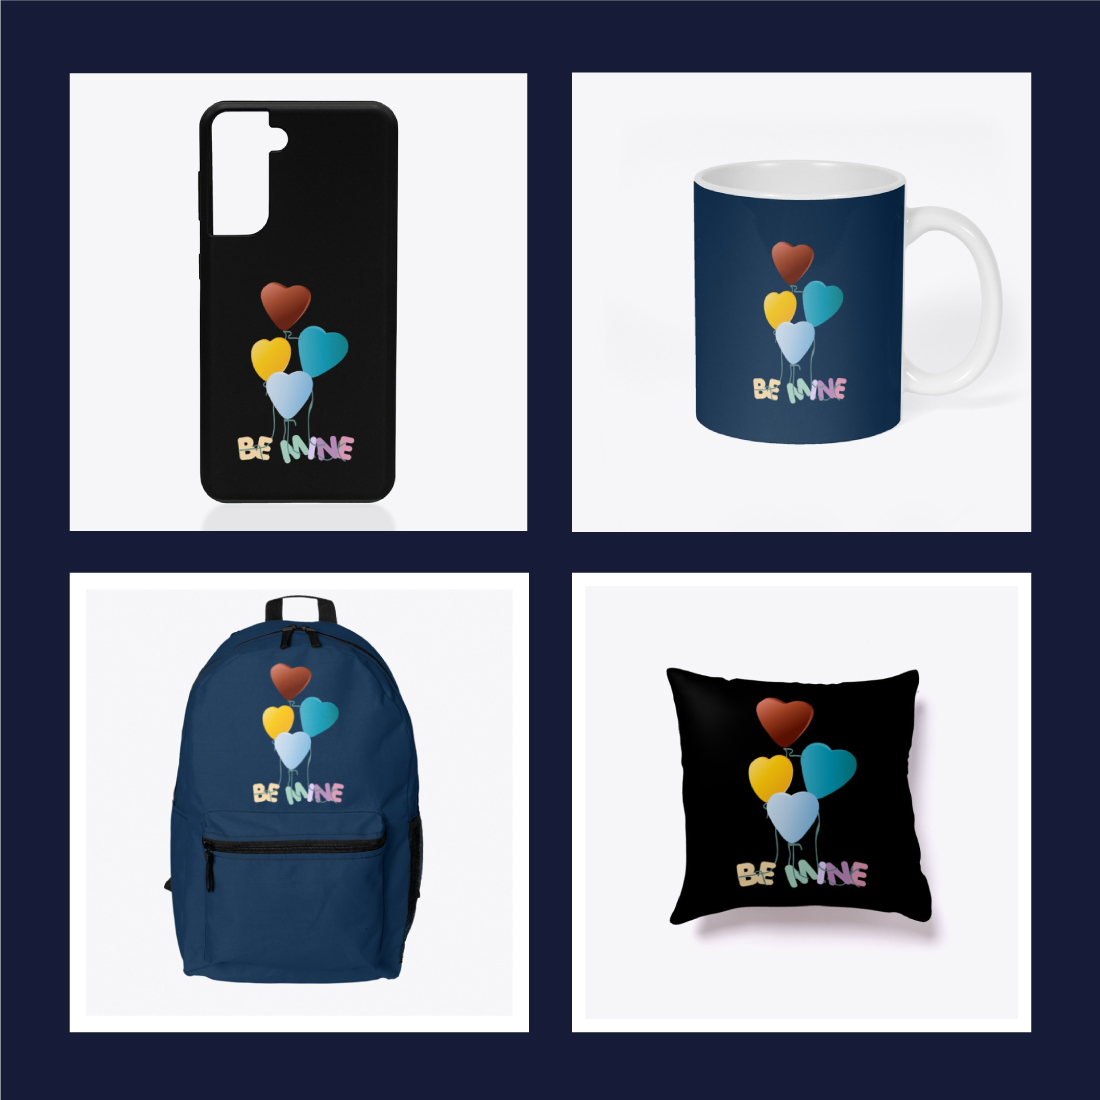 Be Mine typography tshirt design with colorful love or heart shaped balloons preview image.